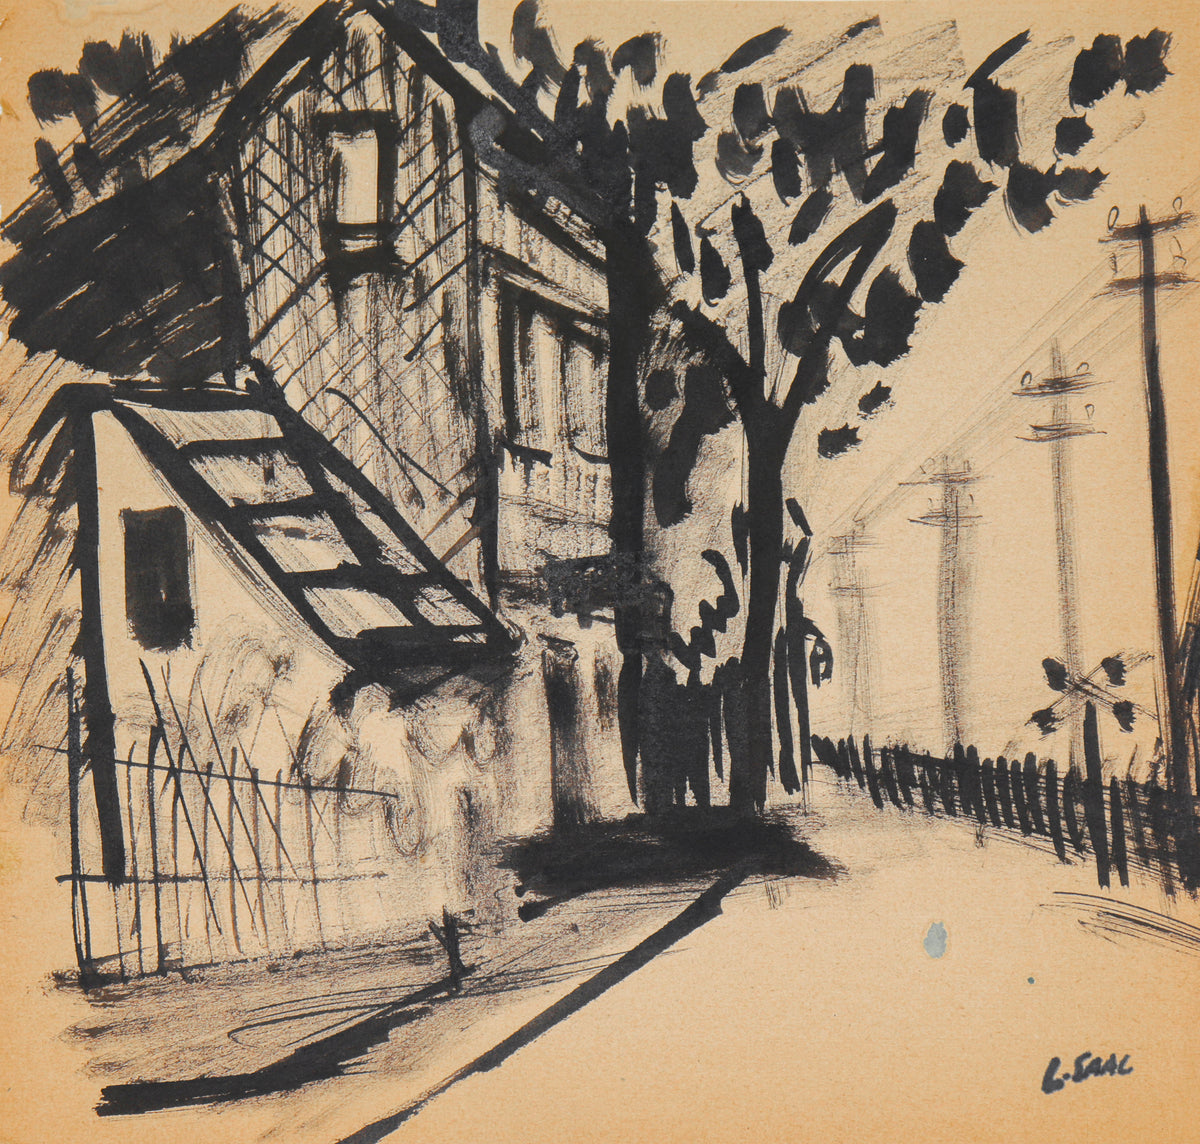 Down the Road Monochromatic Study&lt;br&gt;1946 Ink&lt;br&gt;&lt;br&gt;#C1432